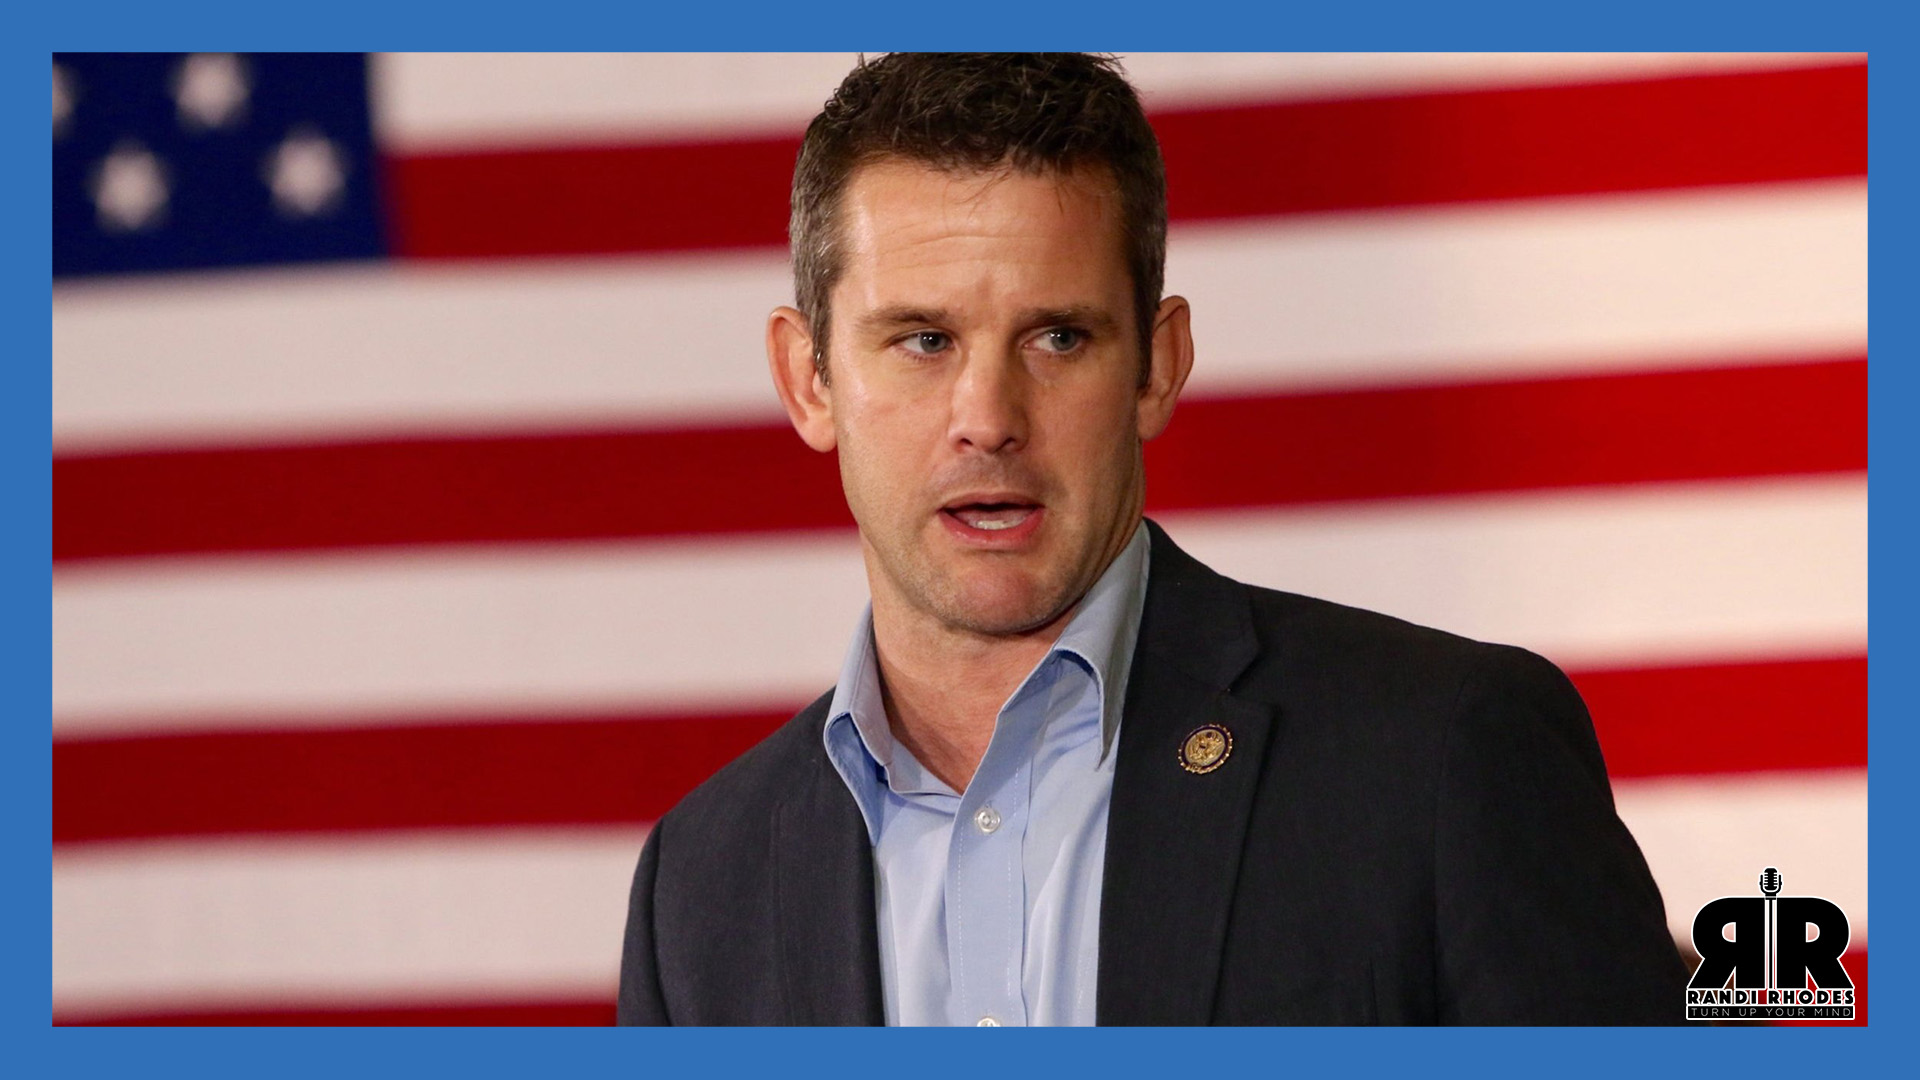 On His Way out, Adam Kinzinger Has Something to Say